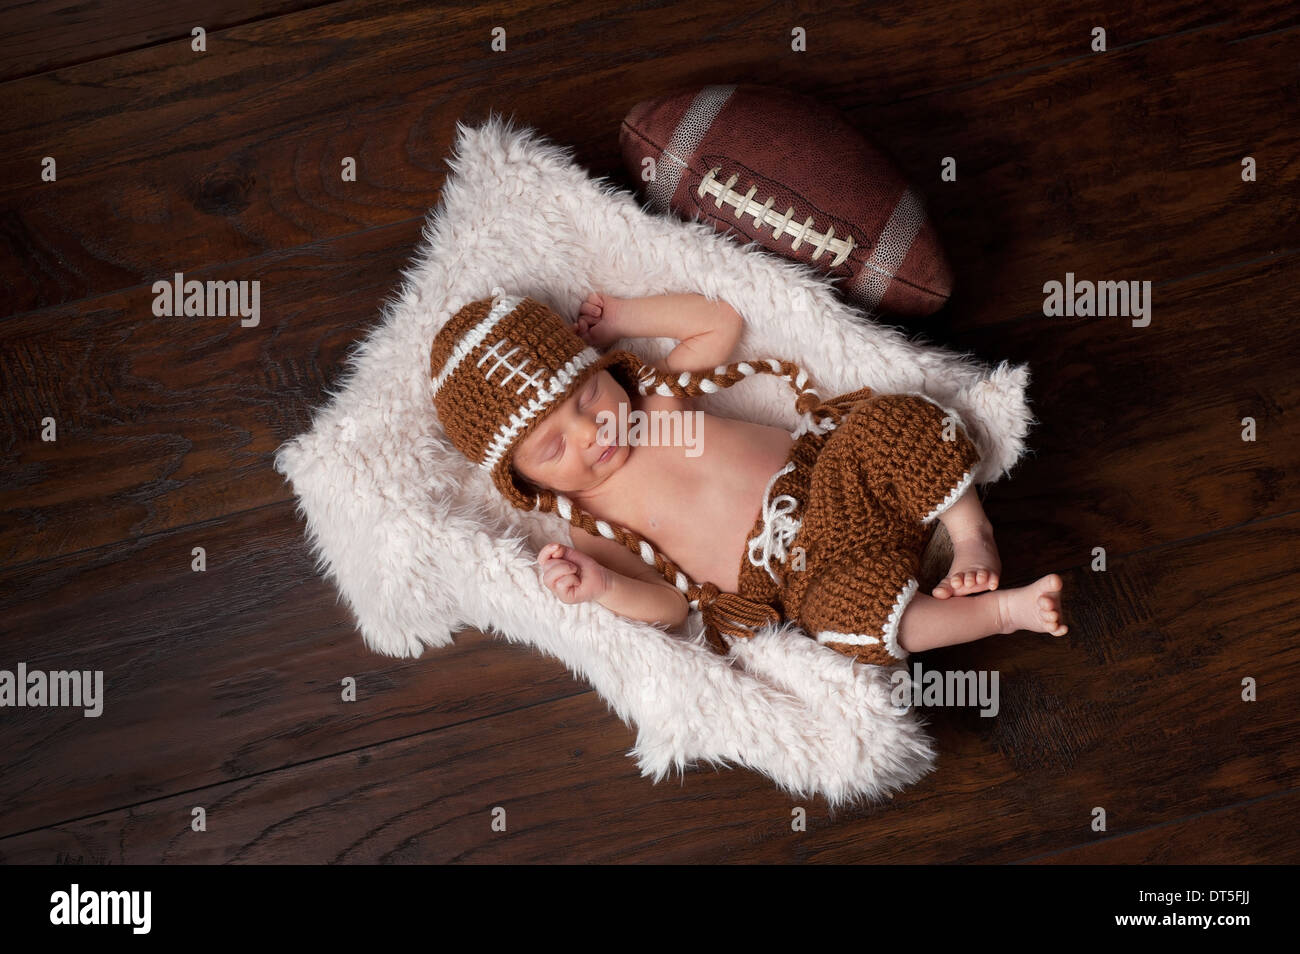 A 12 day old newborn baby boy sleeping in a fur lined crate and wearing a crocheted American football costume. Stock Photo